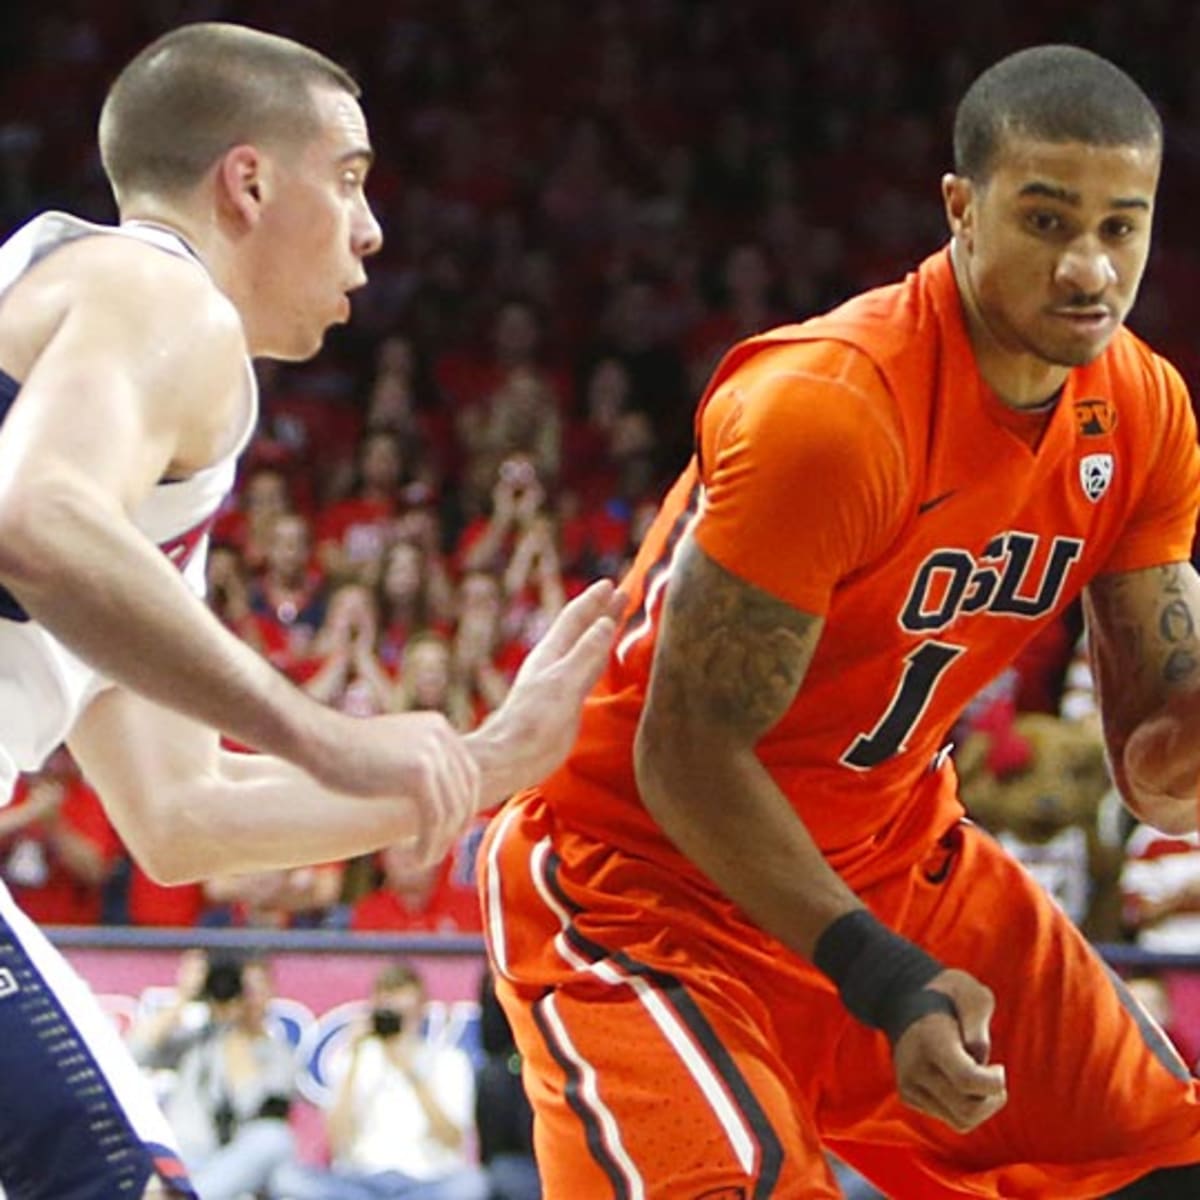 Oregon State guard Gary Payton II following in father's footsteps